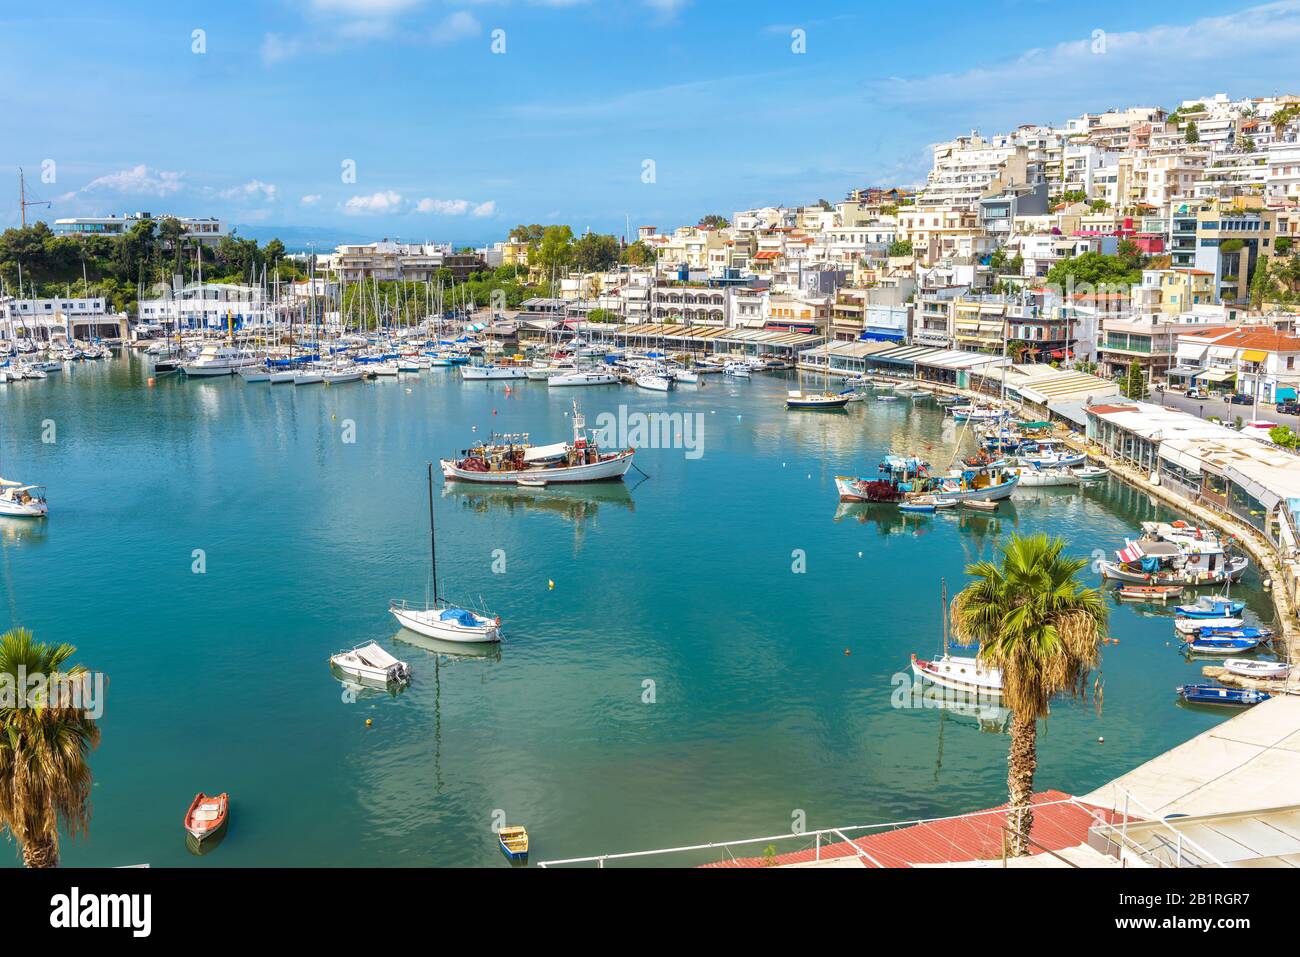 Mikrolimano marina in Piraeus, Athens, Greece. Panoramic view of the beautiful harbor with sail boats. Scenery of the city coast with scenic sea port. Stock Photo